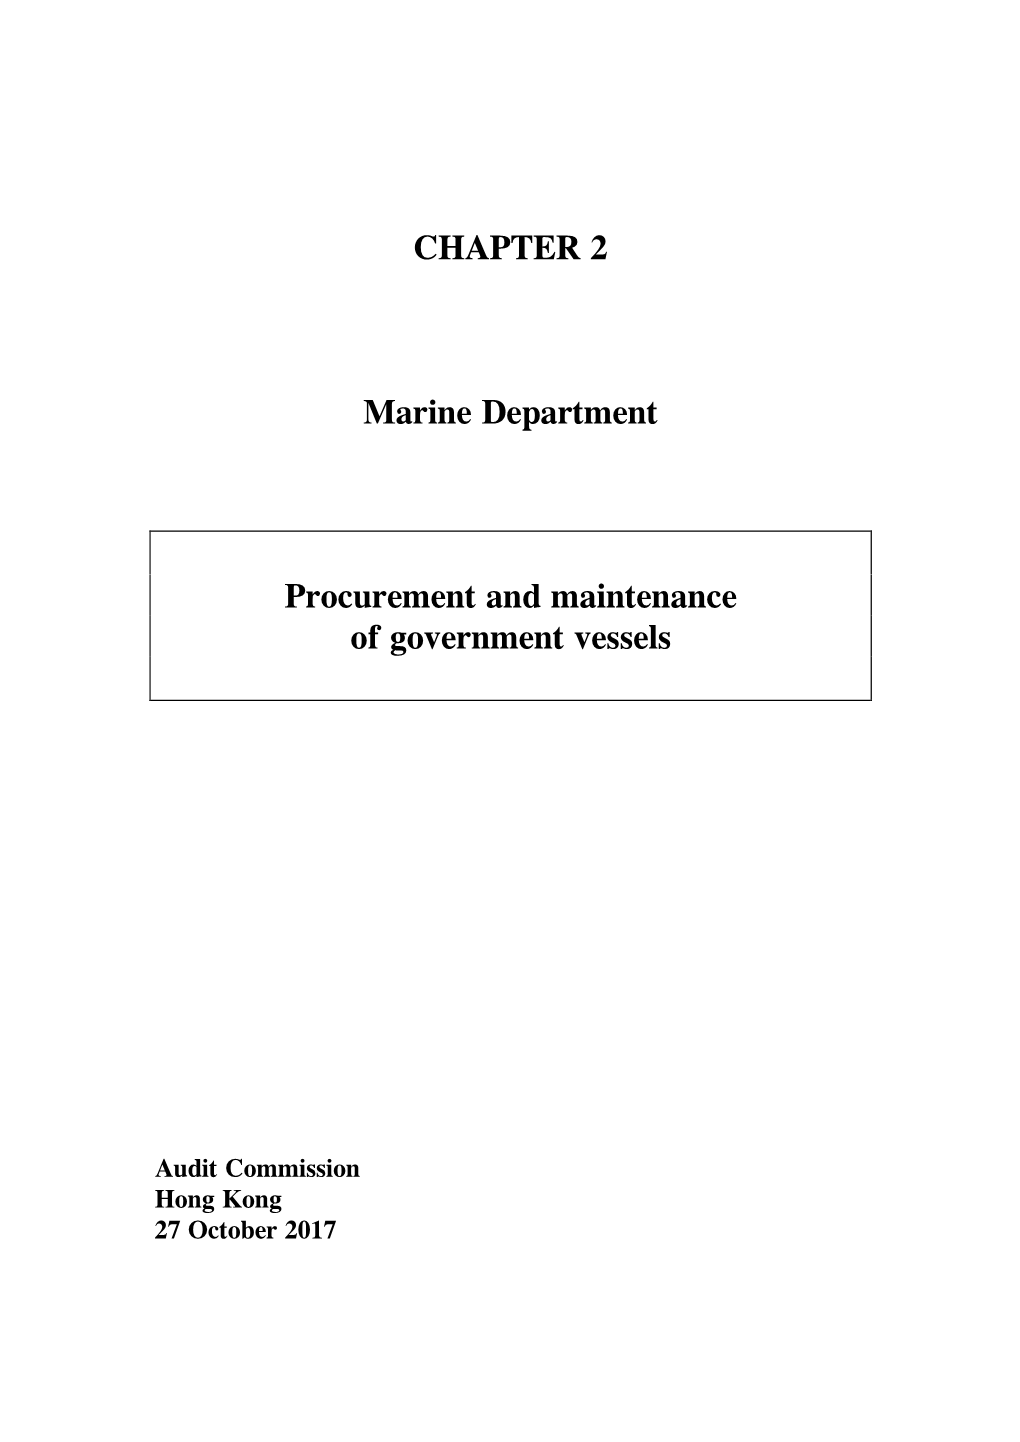 CHAPTER 2 Marine Department Procurement and Maintenance Of